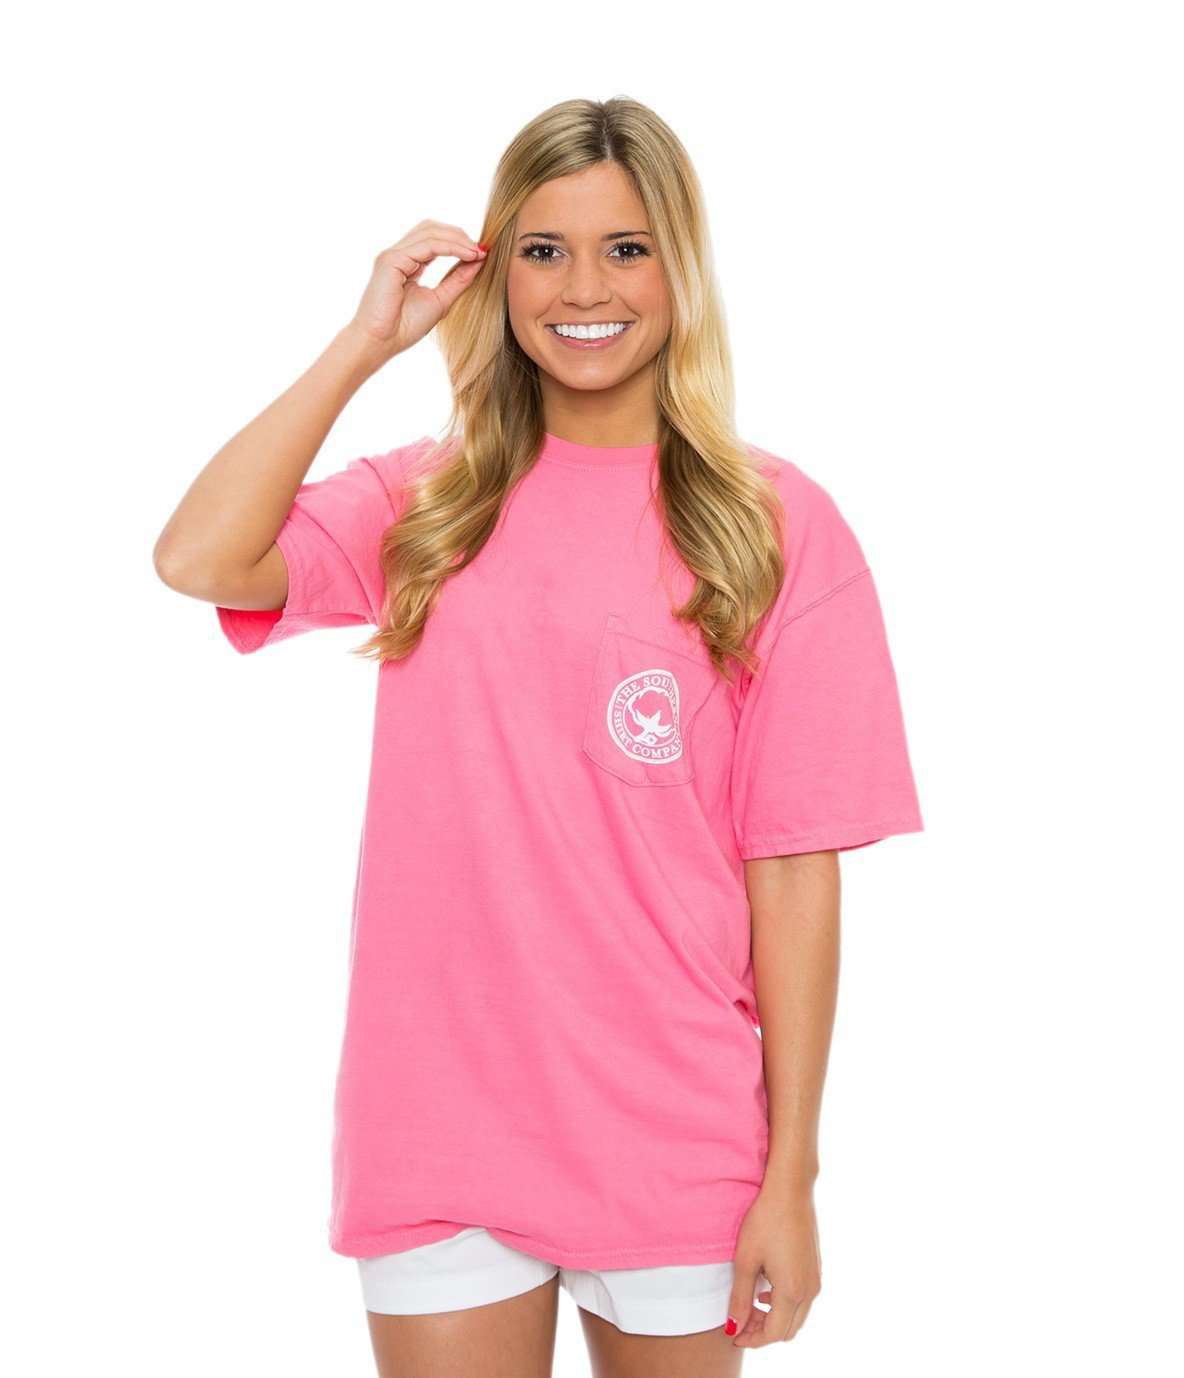 Seaside Logo Tee in Lilly Pink by The Southern Shirt Co. - Country Club Prep